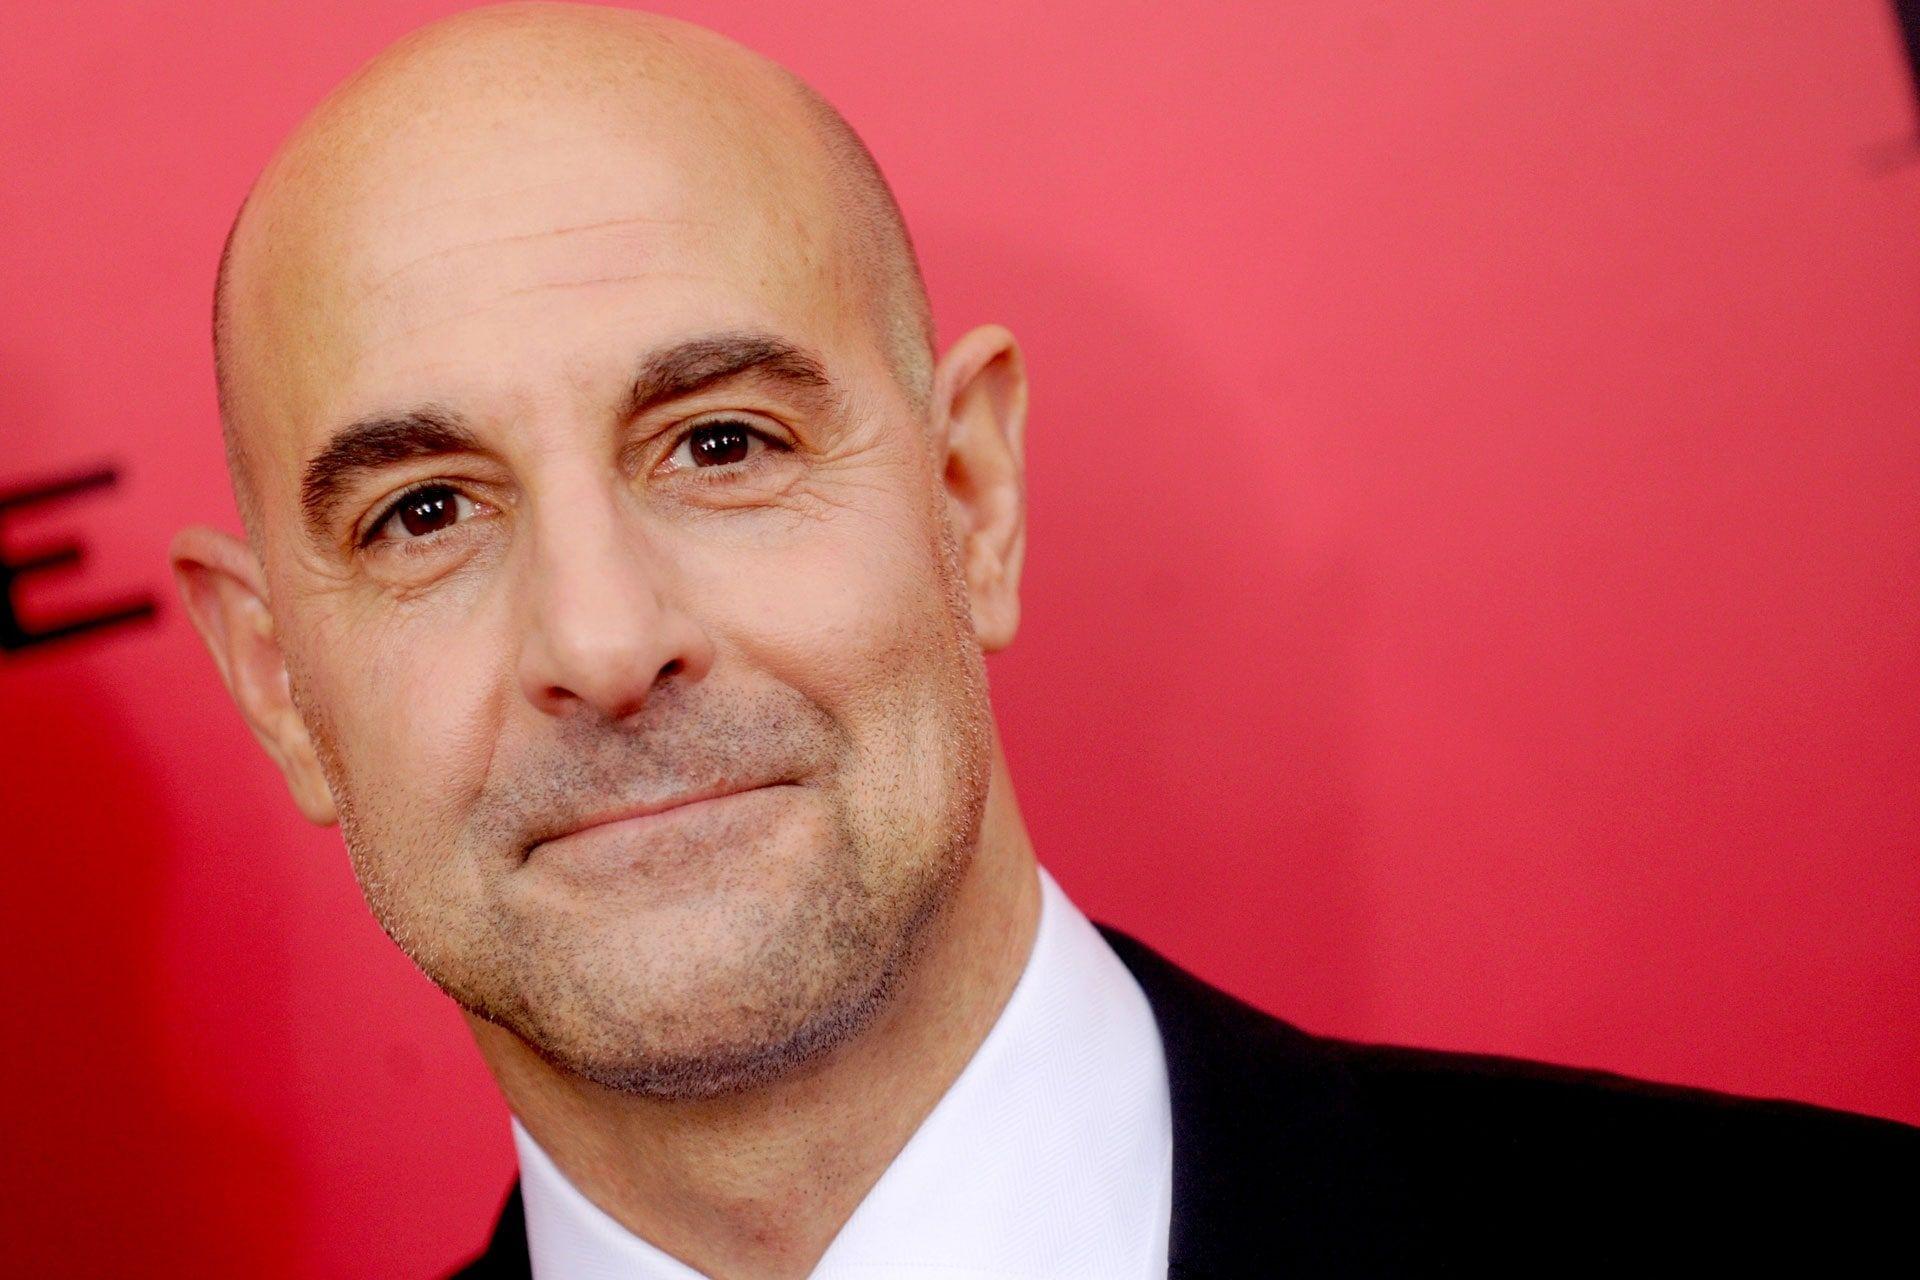 Download Stanley Tucci Celebrity Wallpaper 58728 1920x1280 px High